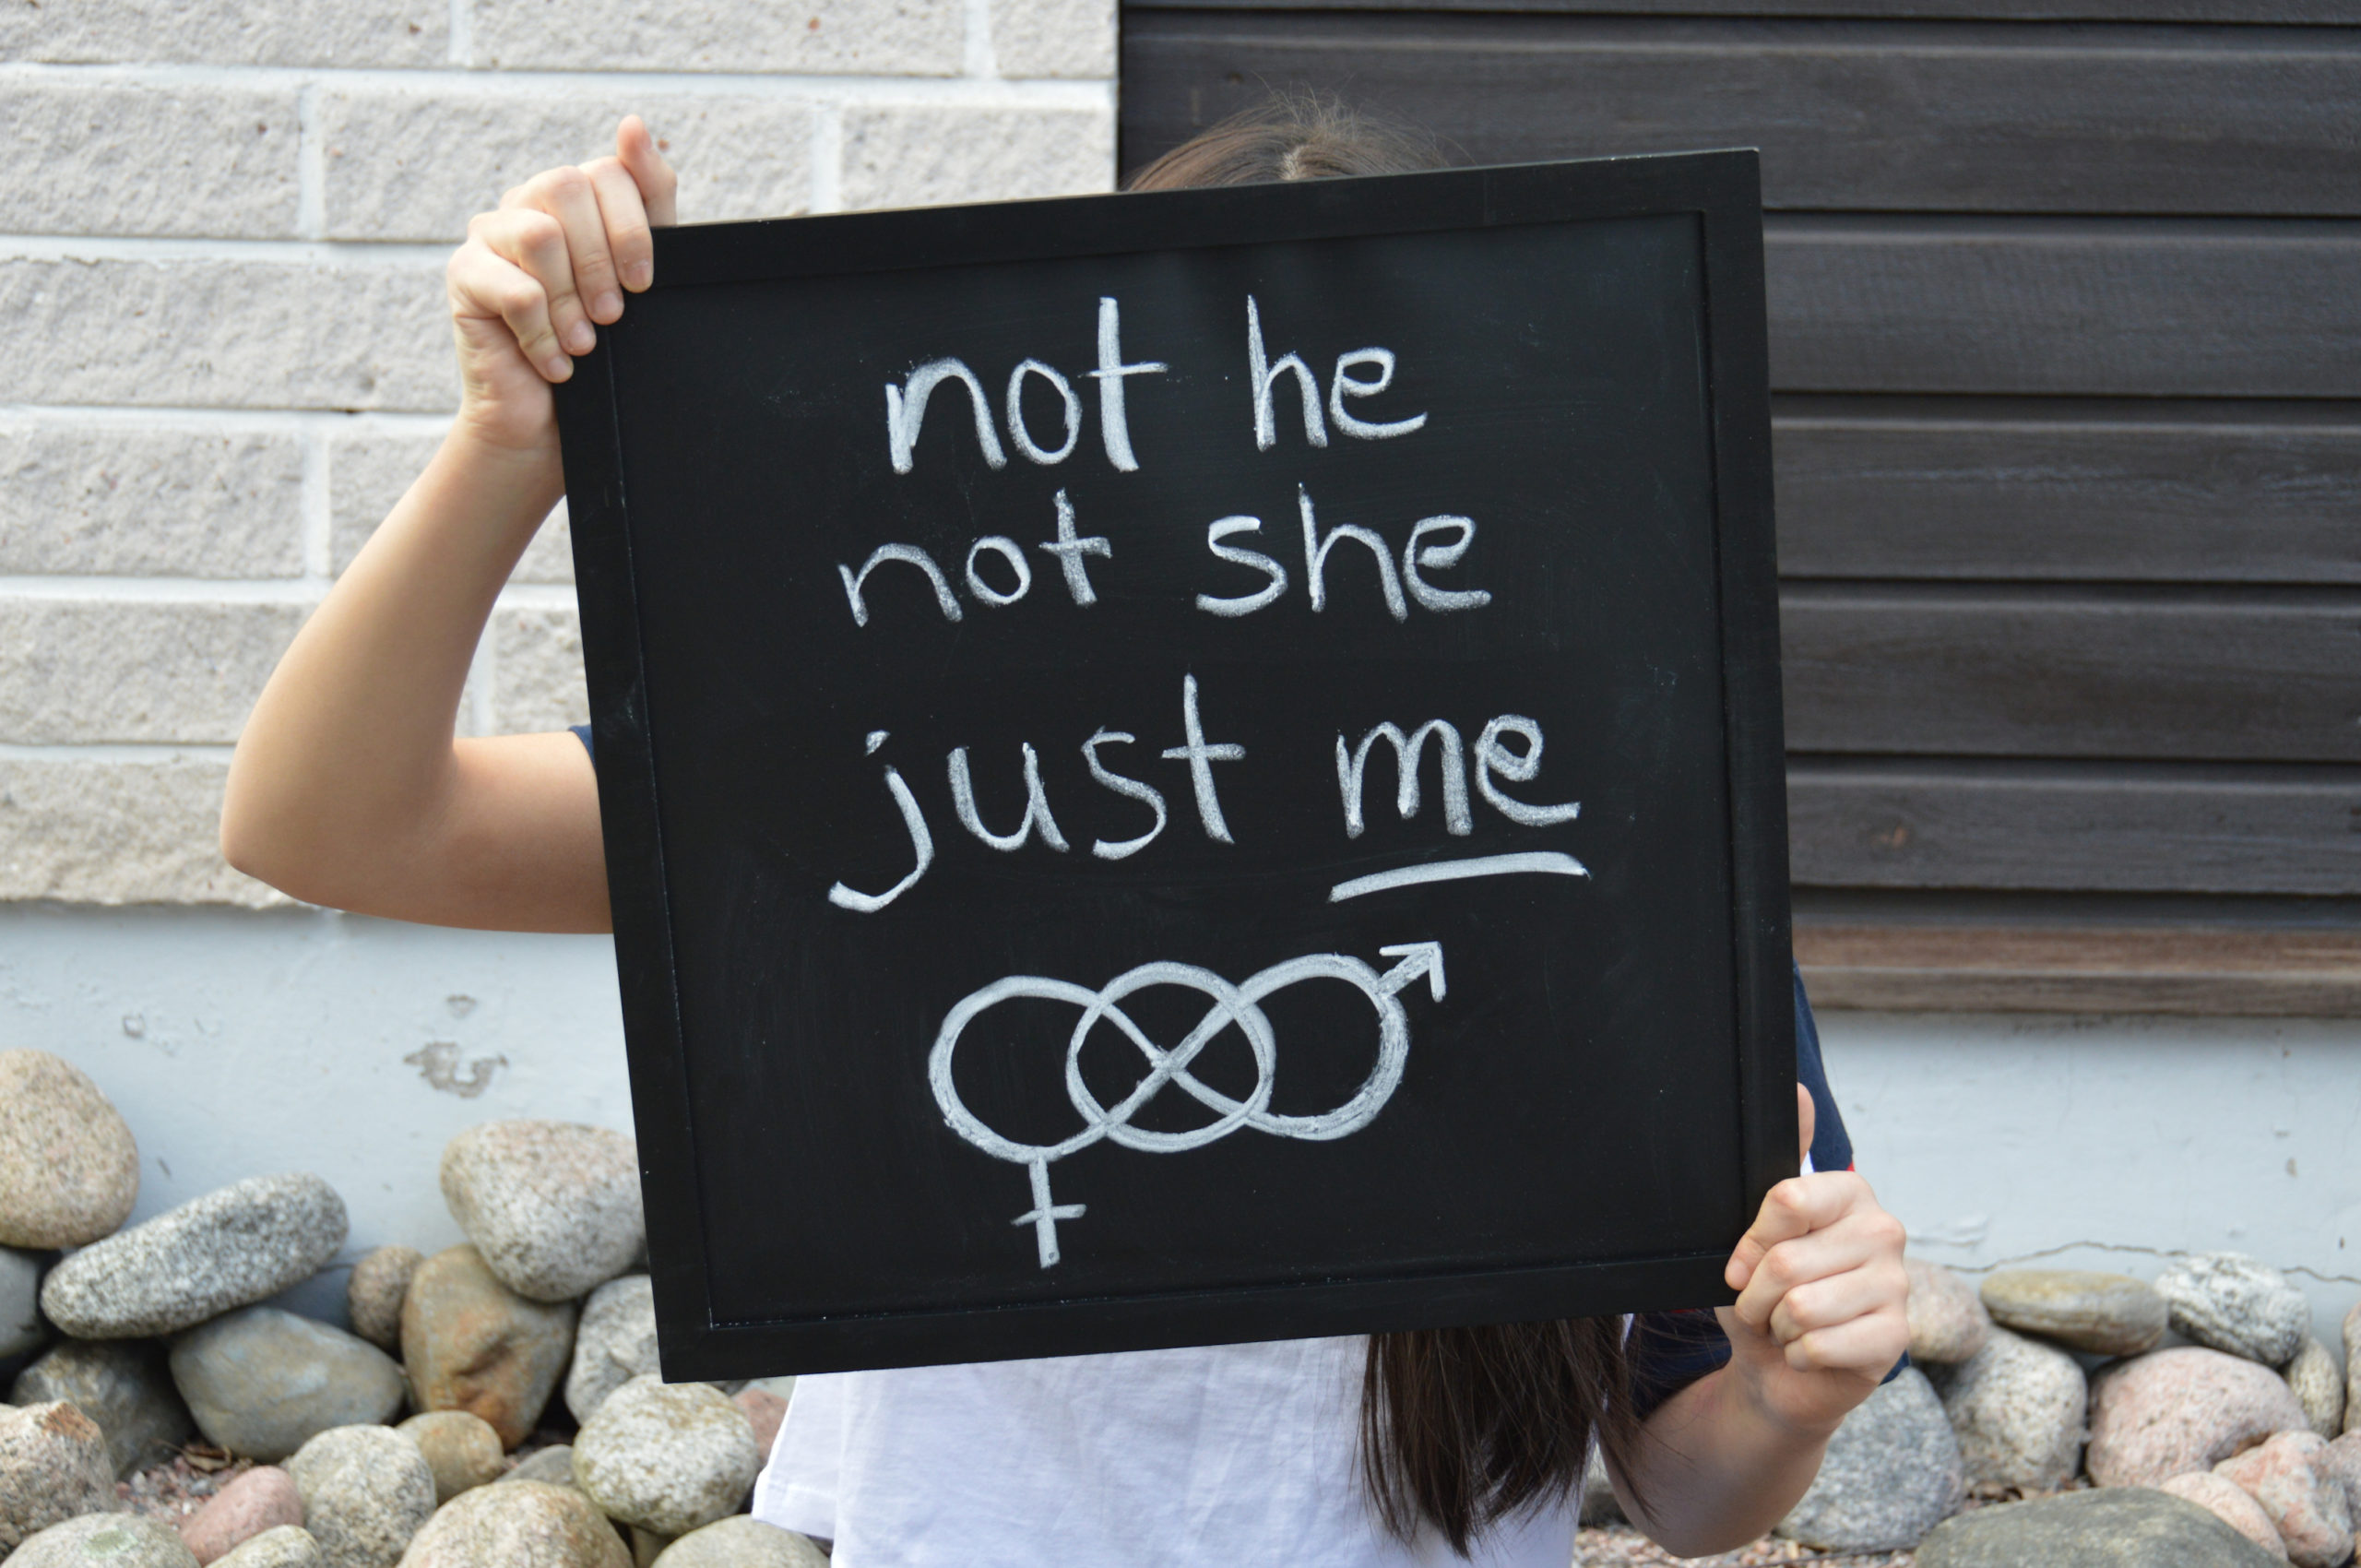 Nonbinary person holding up a sign that says not not he, not she, just me